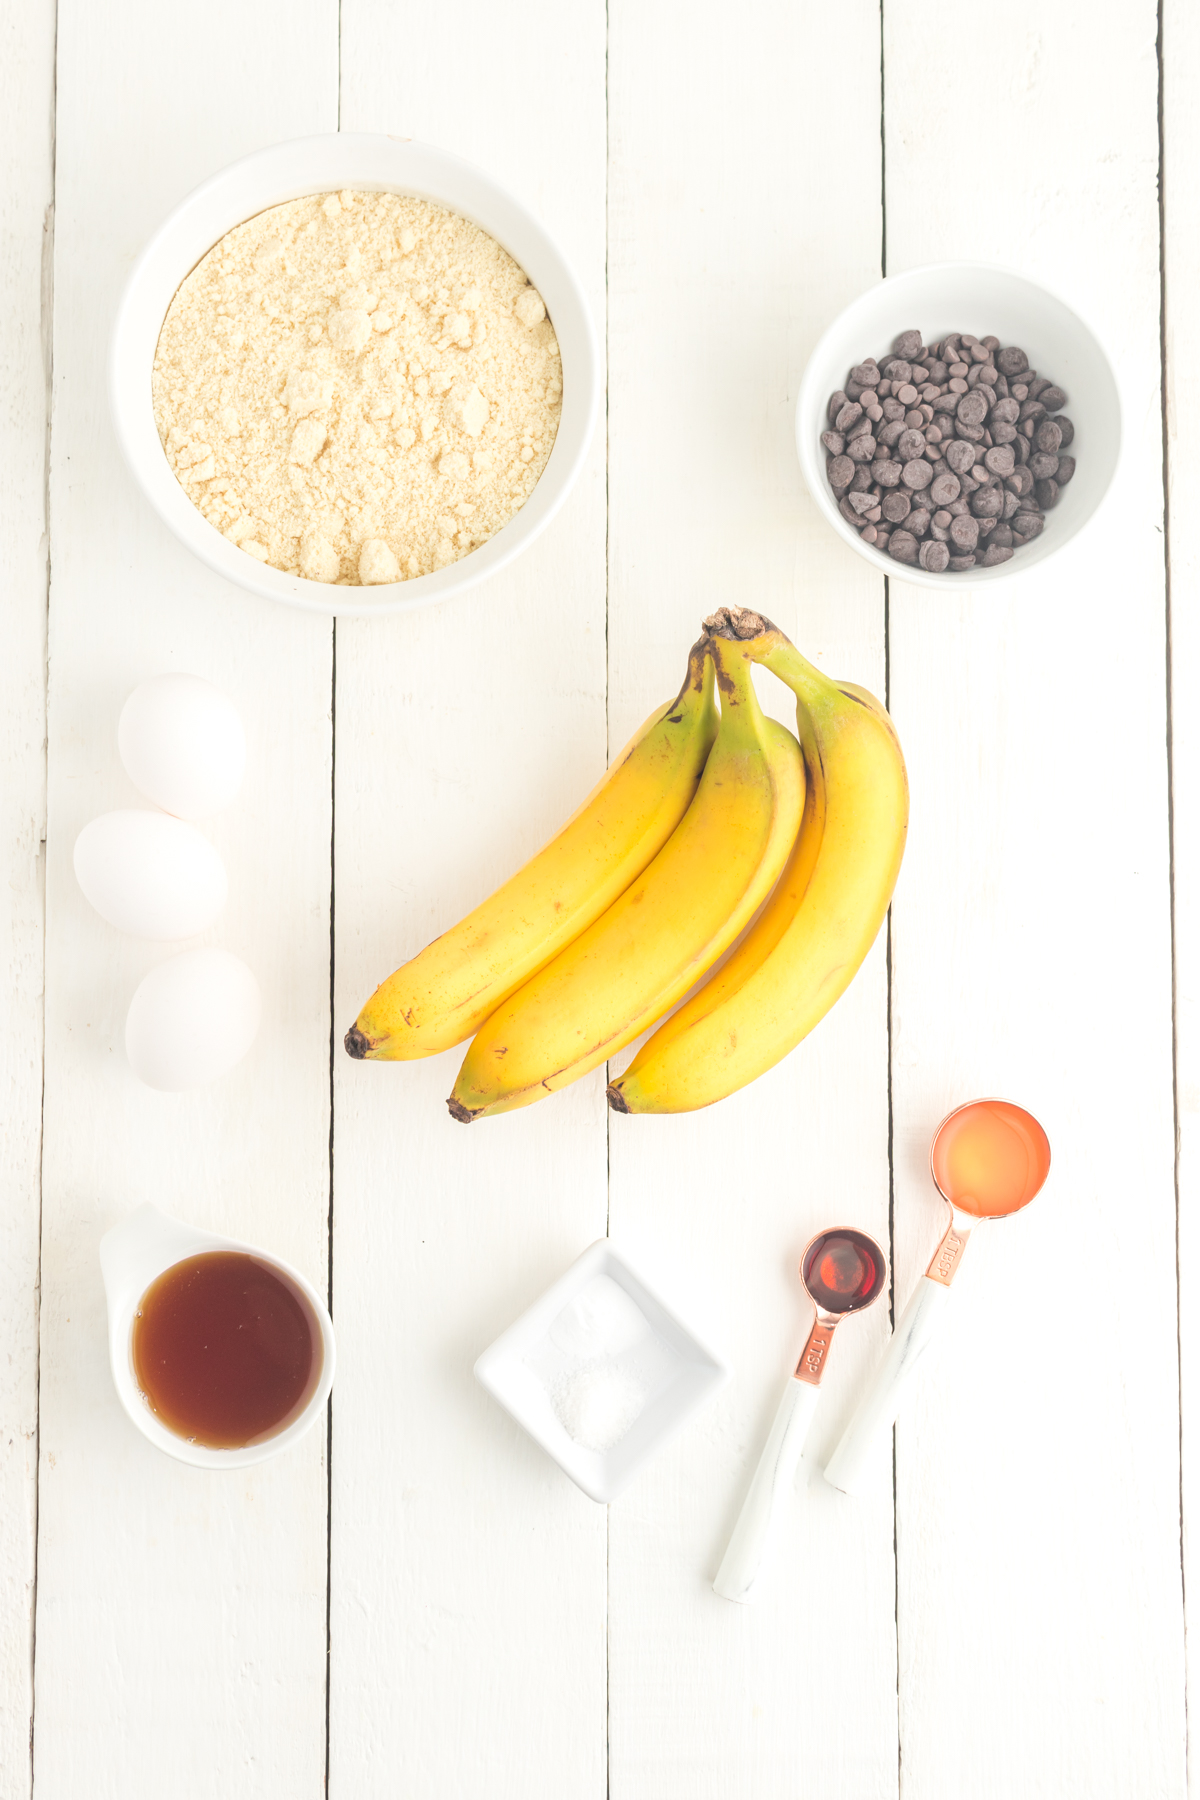 Ingredients for banana muffins.